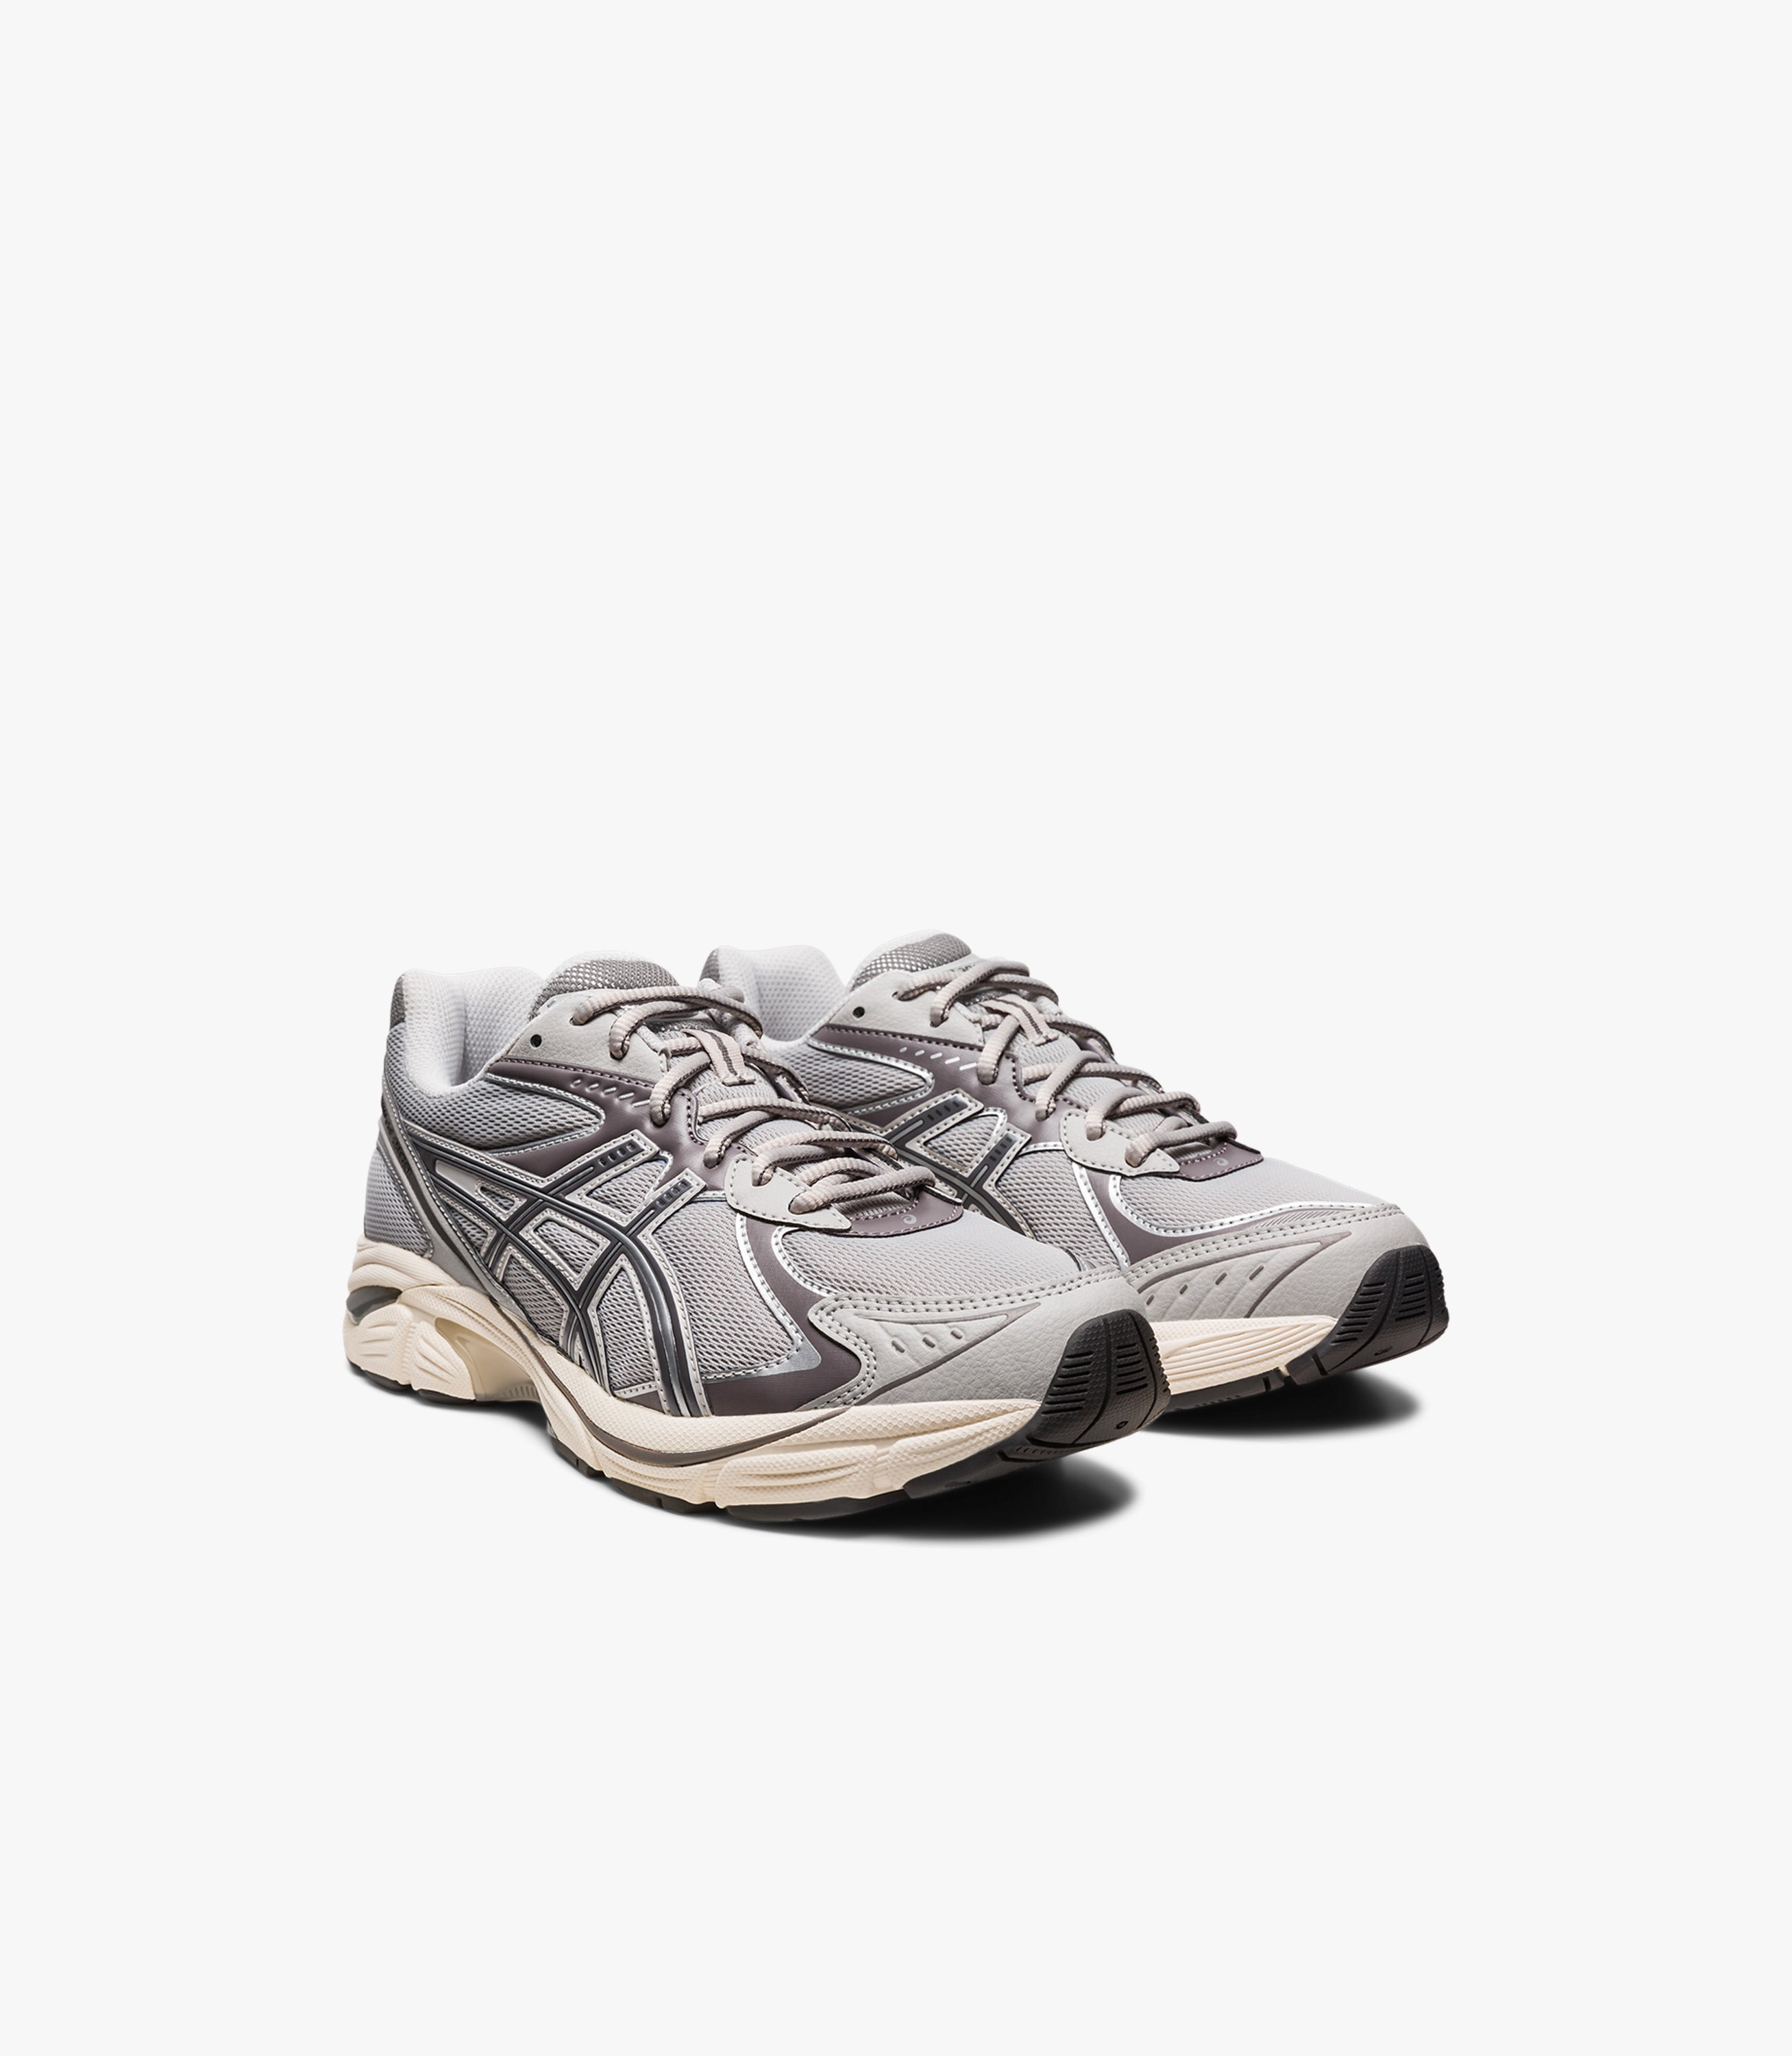 sneaker asics gt 2160 oyster grey carbon 2